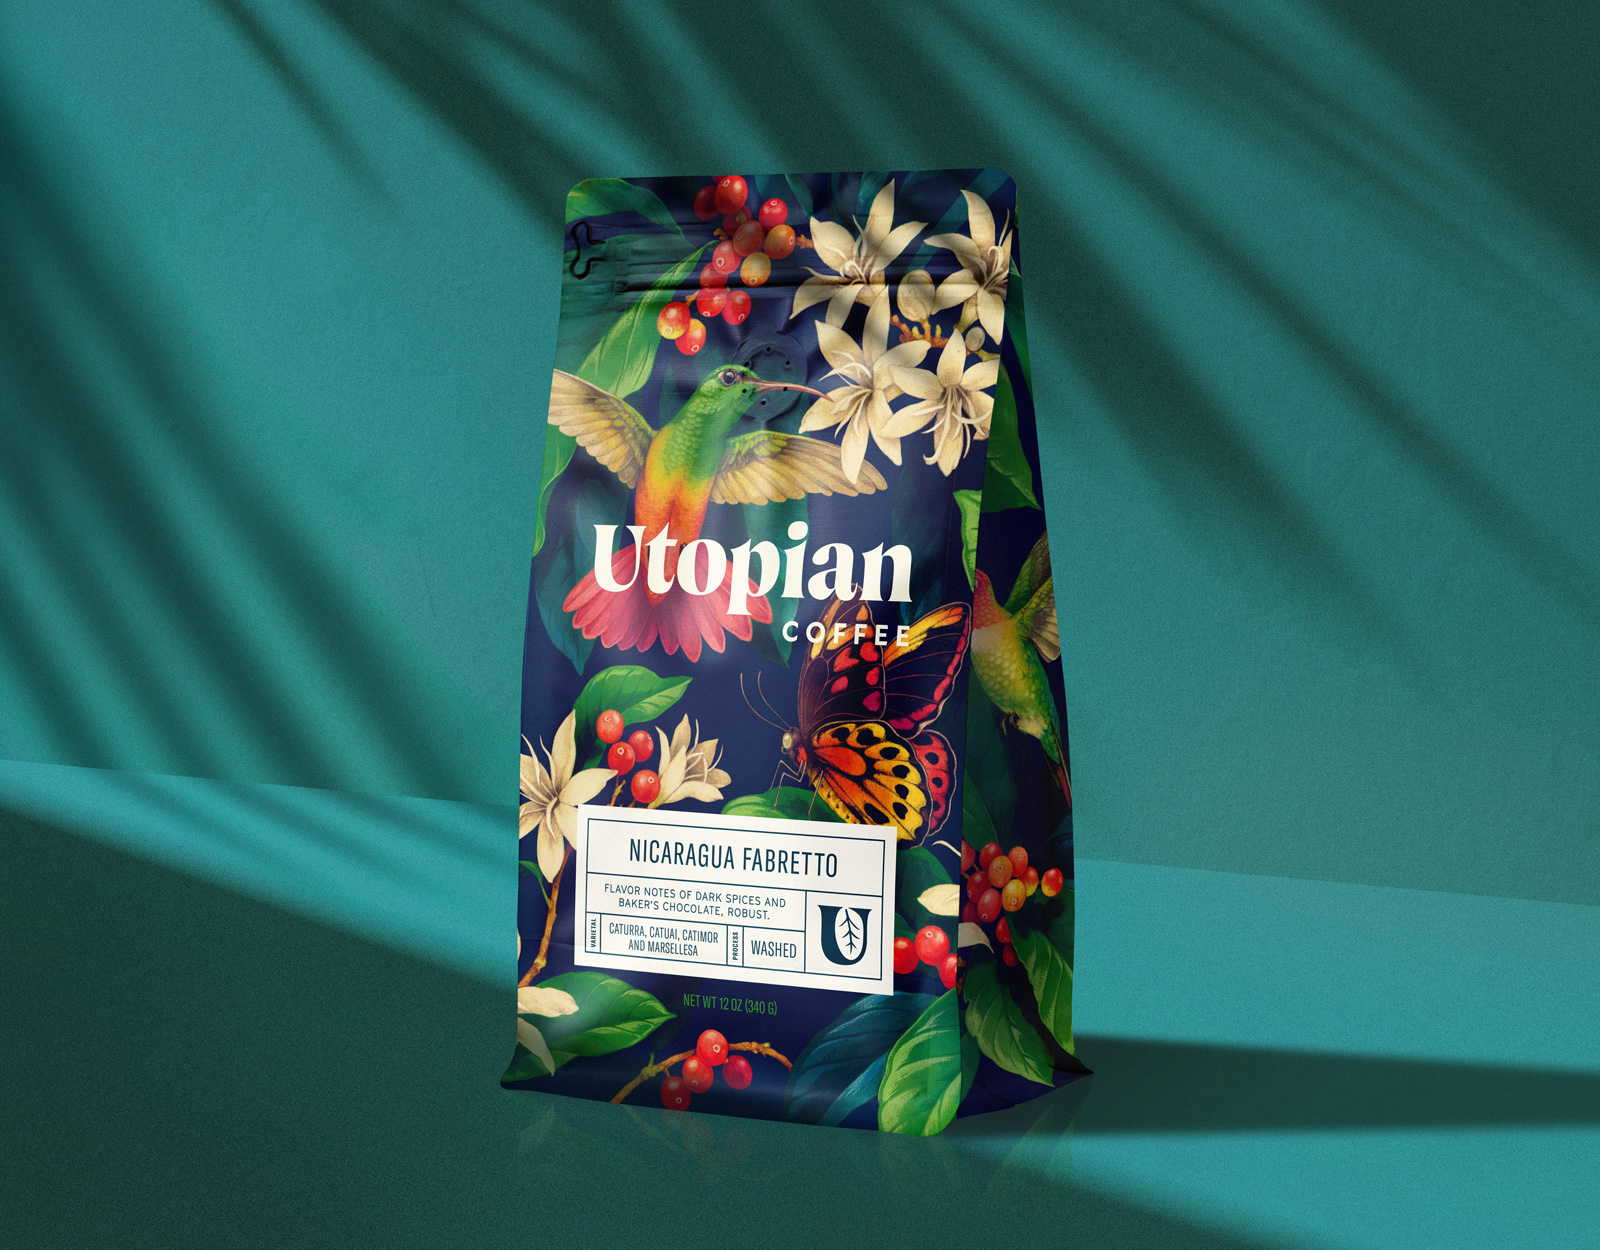 Pavement Gives Utopian Coffee a New Look that Celebrates the Origins of Coffee